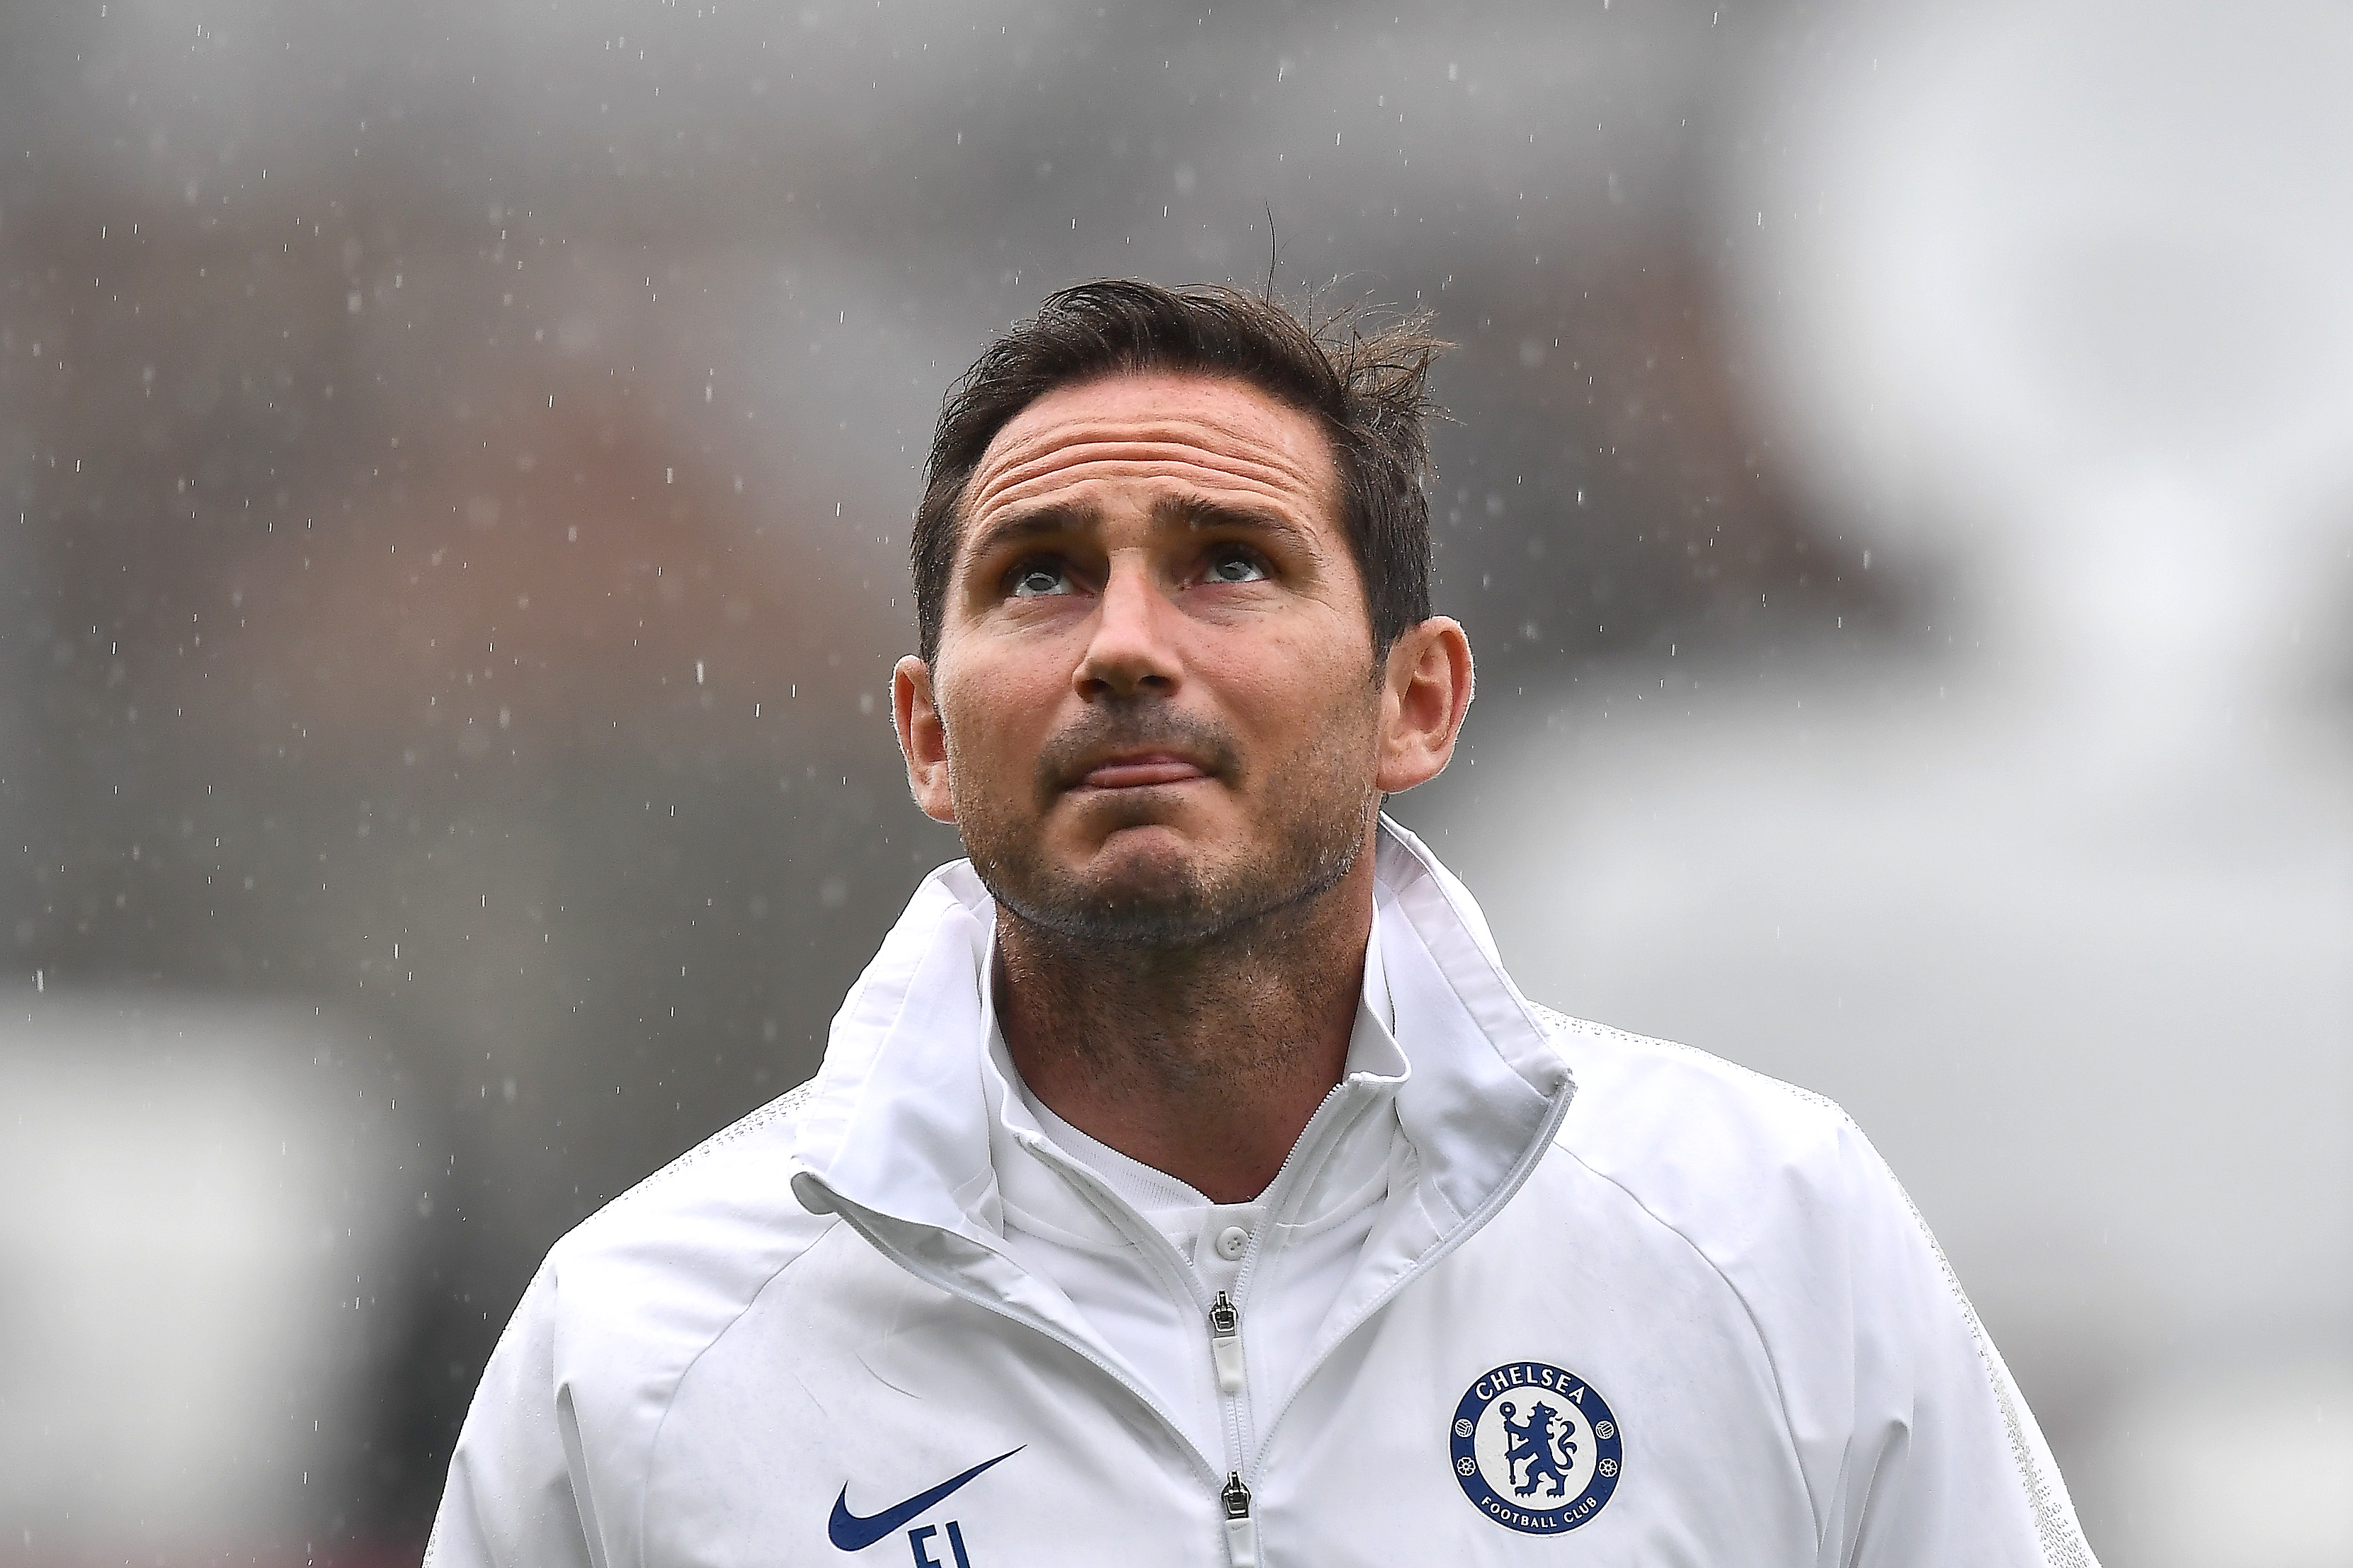 DUBLIN, IRELAND - JULY 10: Frank Lampard, Manager of Chelsea arrives at the stadium prior to the Pre-Season Friendly match between Bohemians FC and Chelsea FC at Dalymount Park on July 10, 2019 in Dublin, Ireland. (Photo by Charles McQuillan/Getty Images)